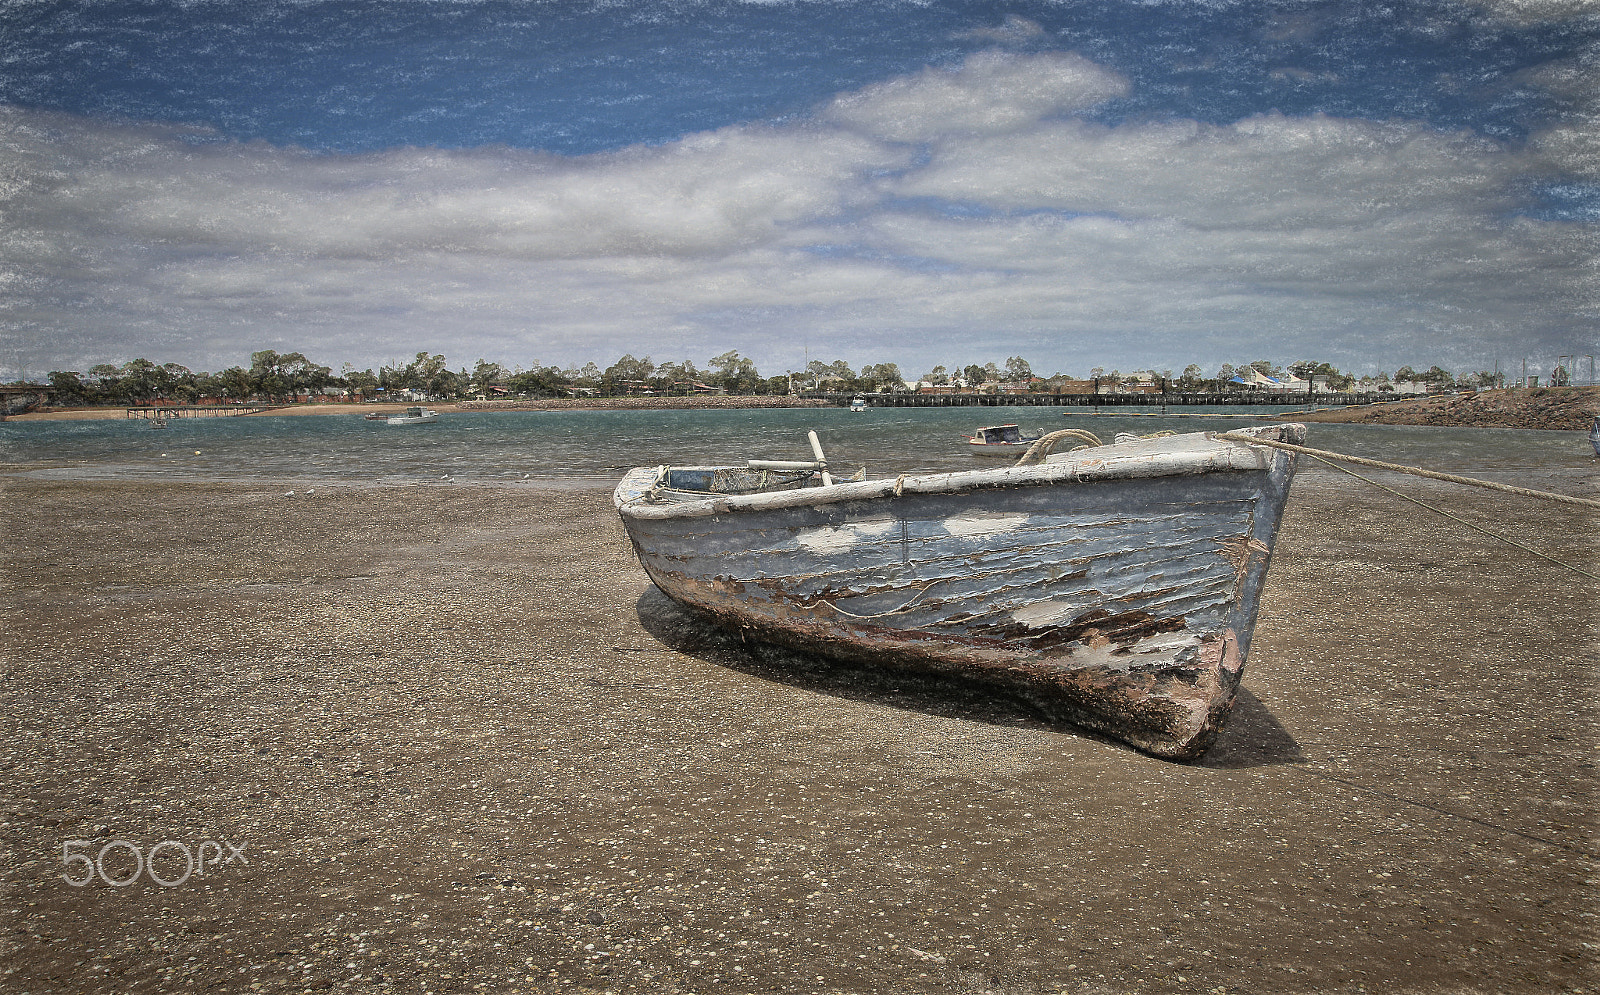 Canon EOS 6D + Sigma 24-105mm f/4 DG OS HSM | A sample photo. Old boat edit photography